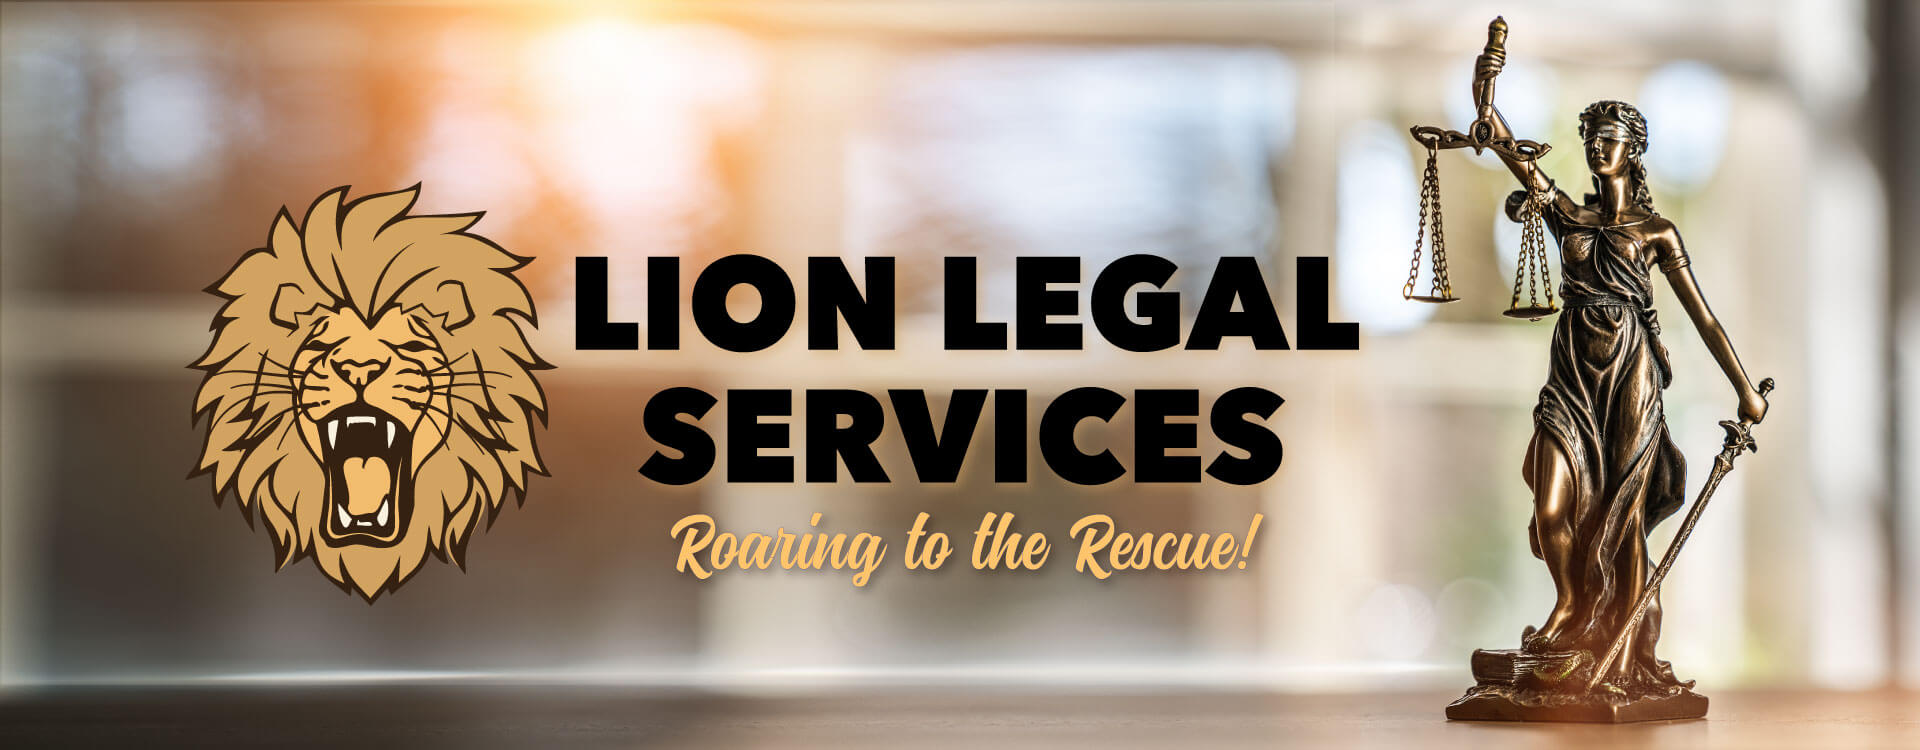 Home of Lion Legal Services—Roaring to the Rescue in Central Arkansas